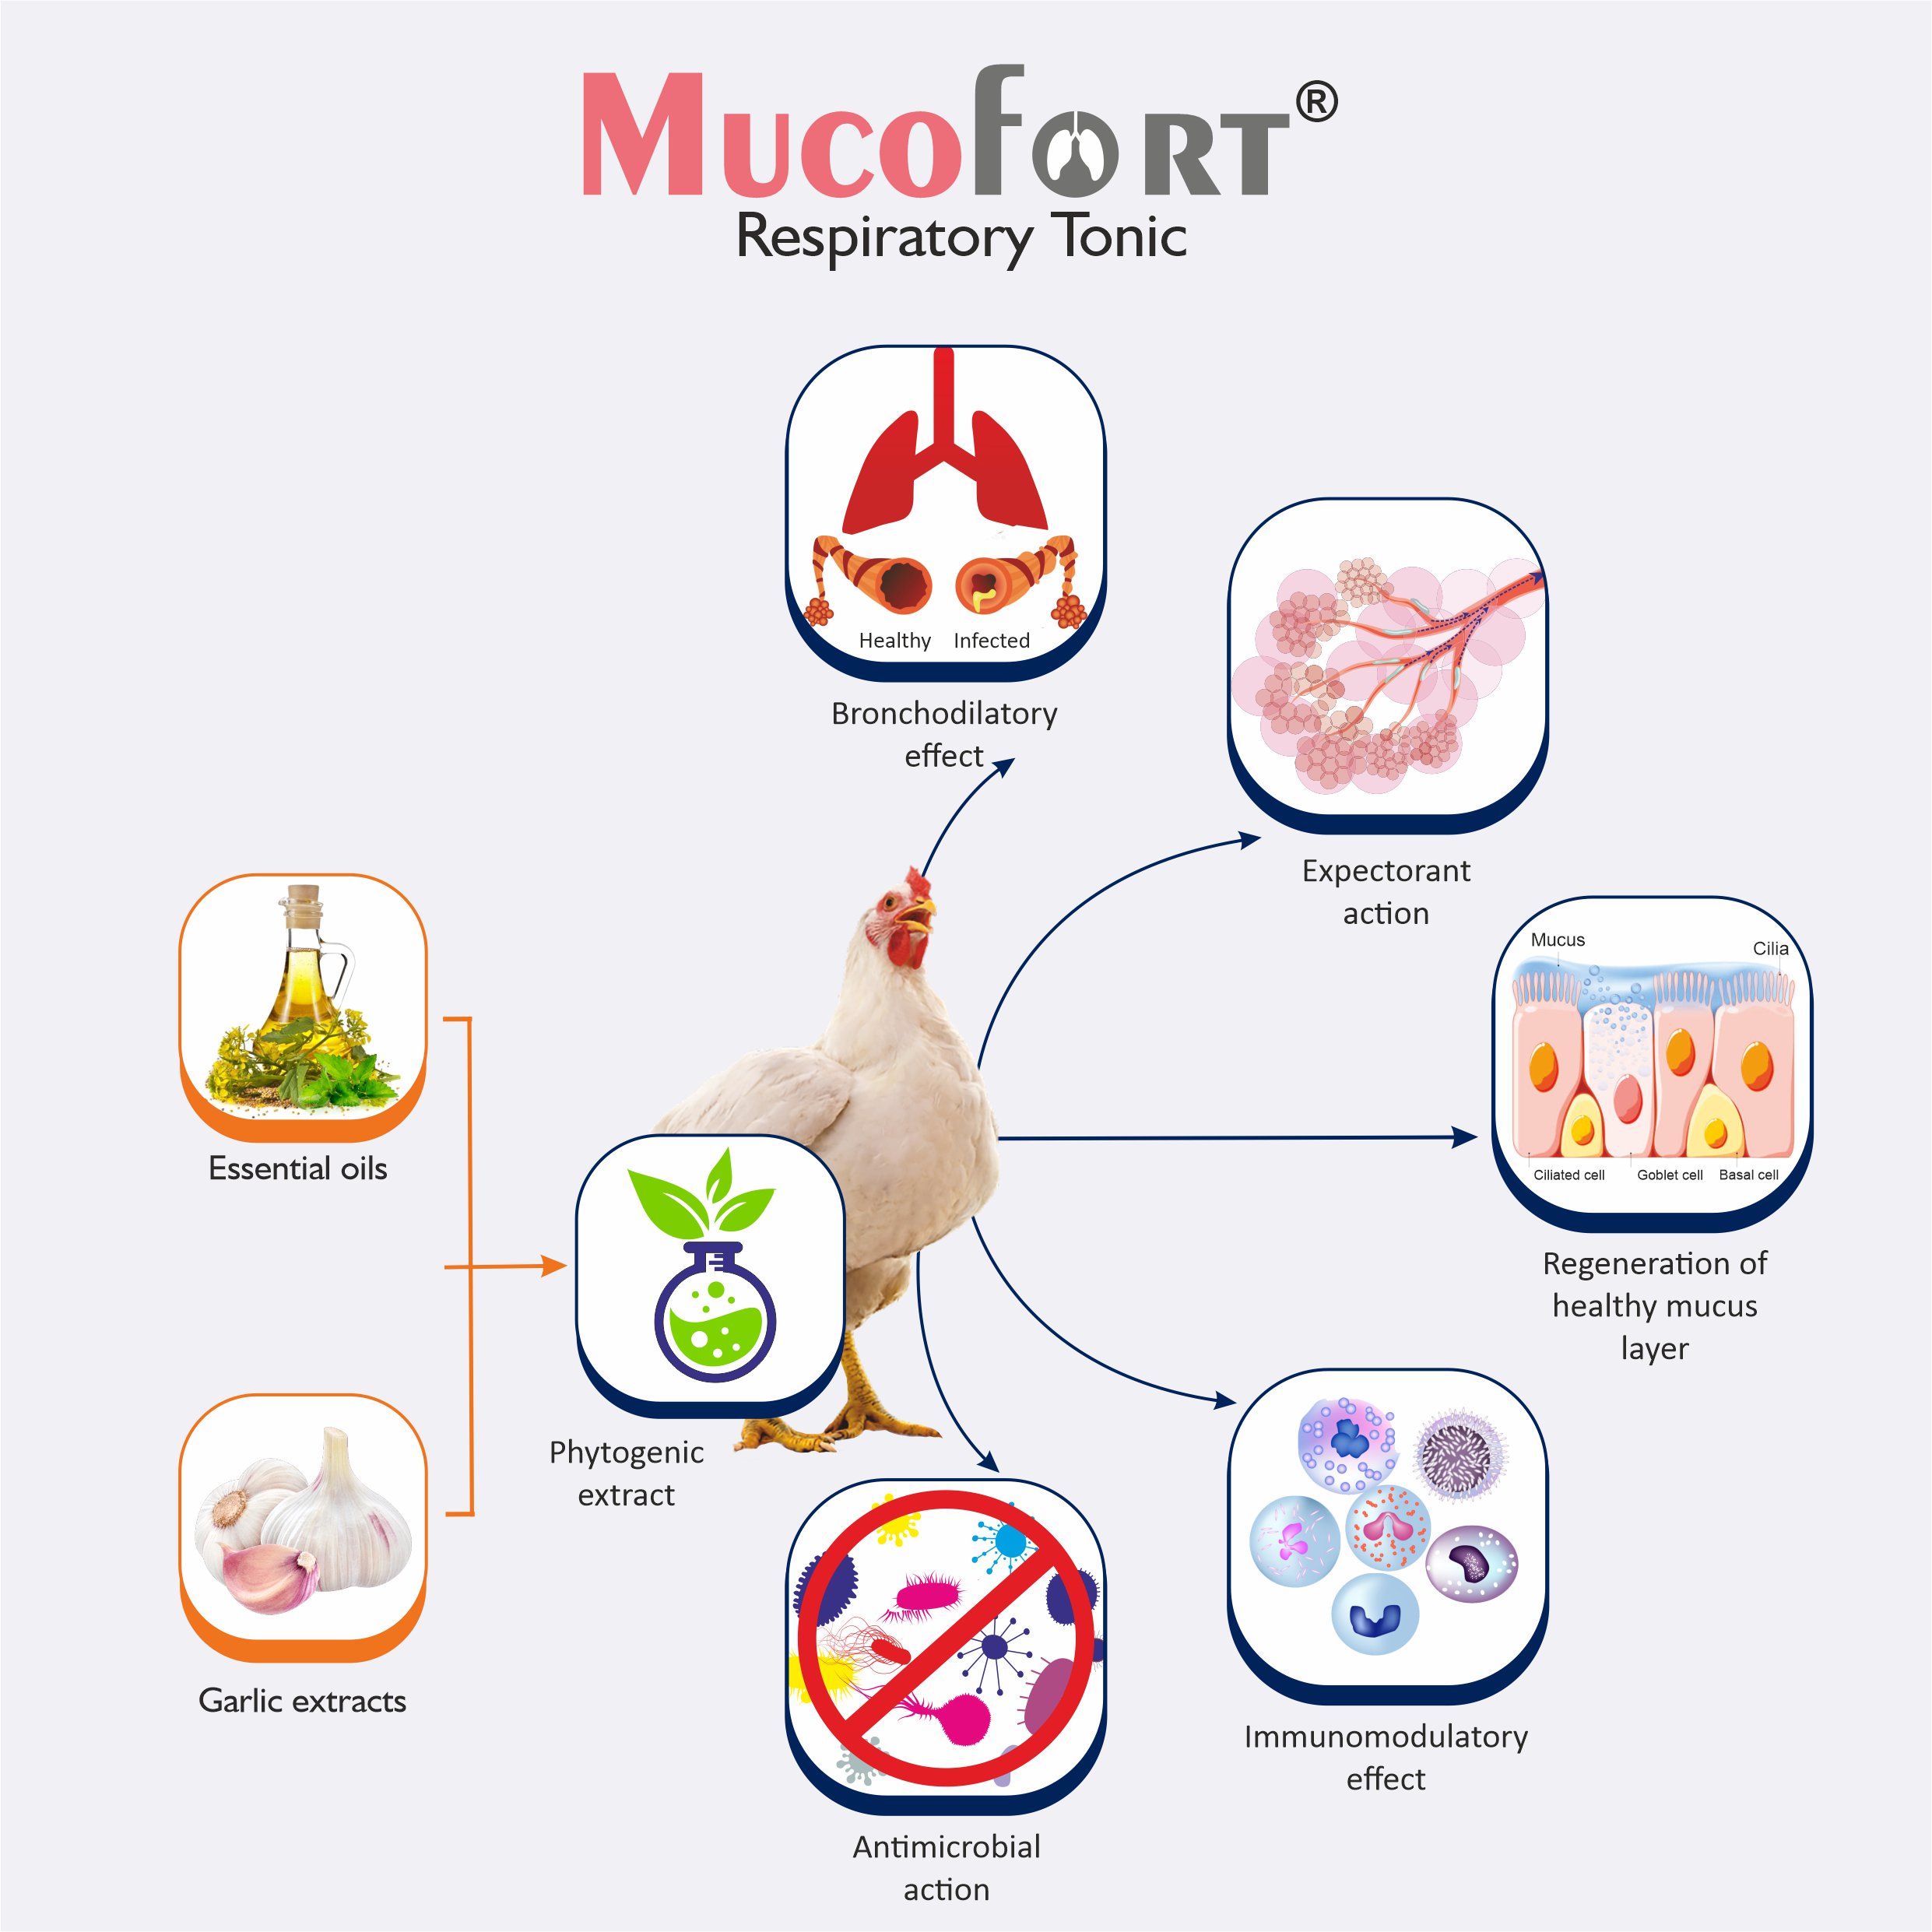 Mucofort-MOA-herbal-espiratory-tonic-for-poultry-rapid-recovery-from-respiratory-diseases-in-poultry